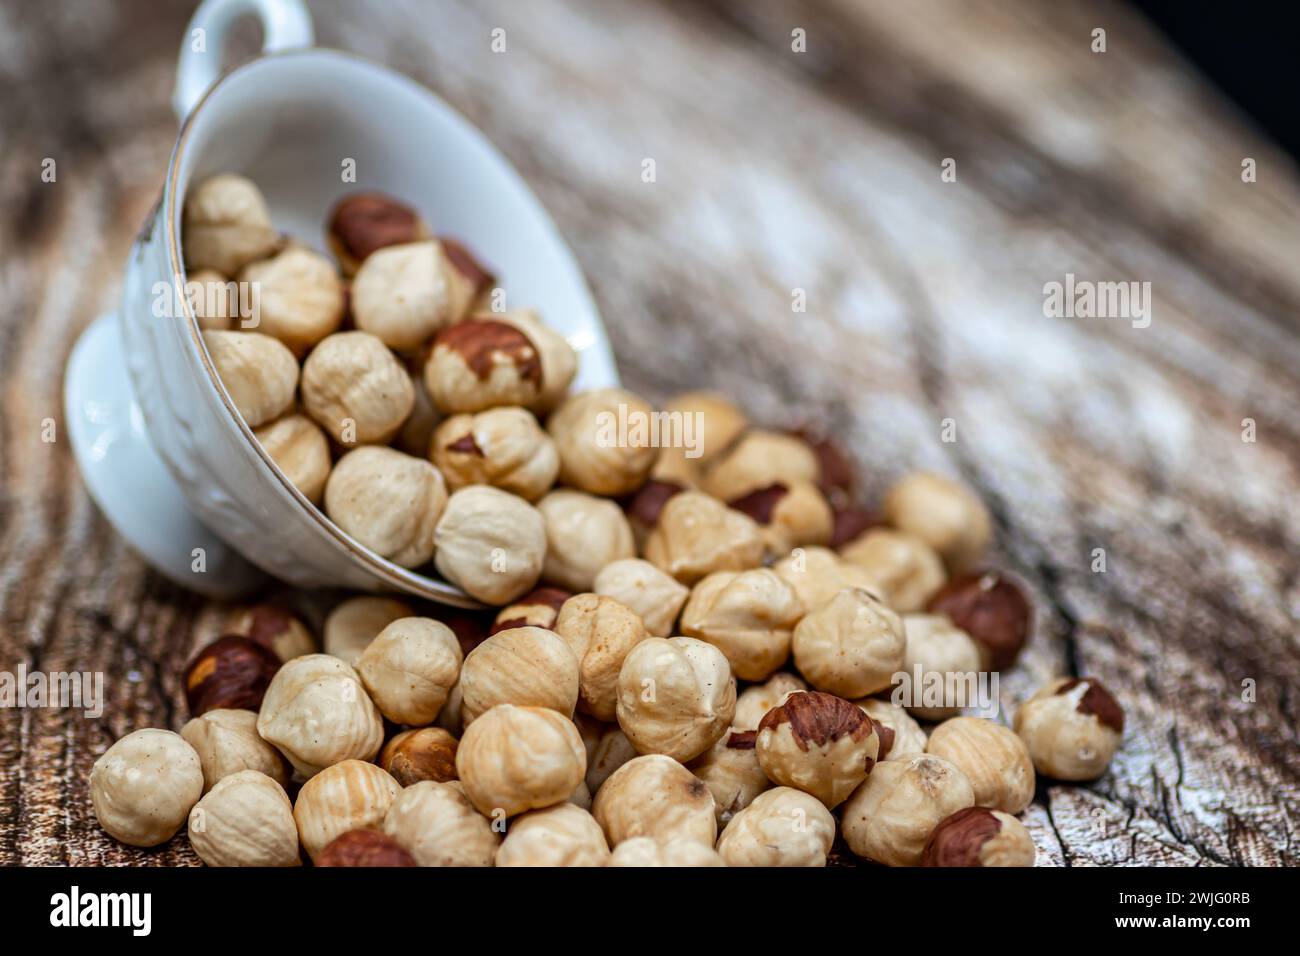 Peeled and roasted organically grown hazelnuts spilling out of a ceramic bowl on wooden table, close-up of healthy roasted hazelnuts, healthy snacks Stock Photo